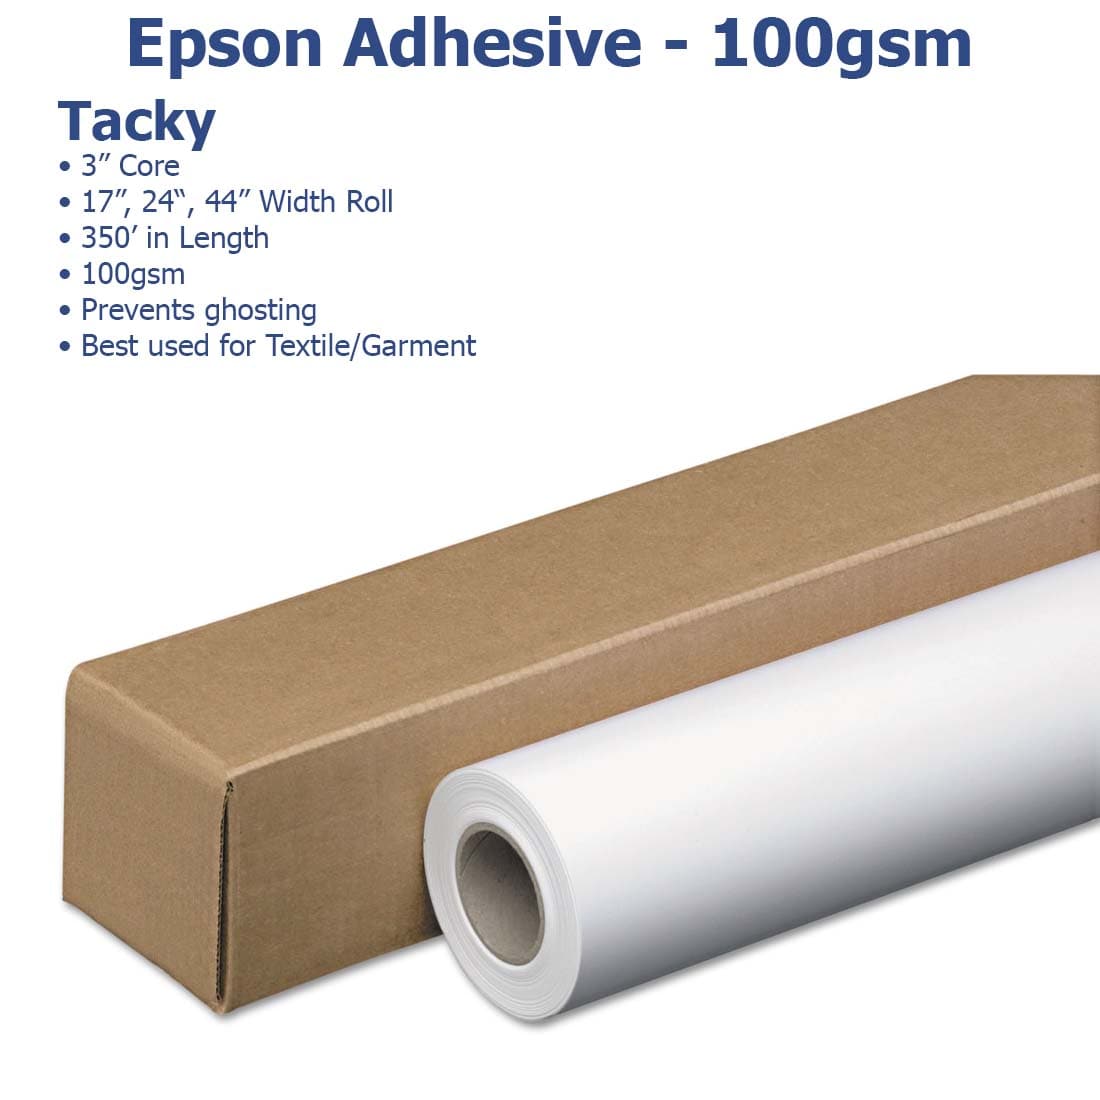 Epson® DS Adhesive Textile Transfer Roll - Joto Imaging Supplies US